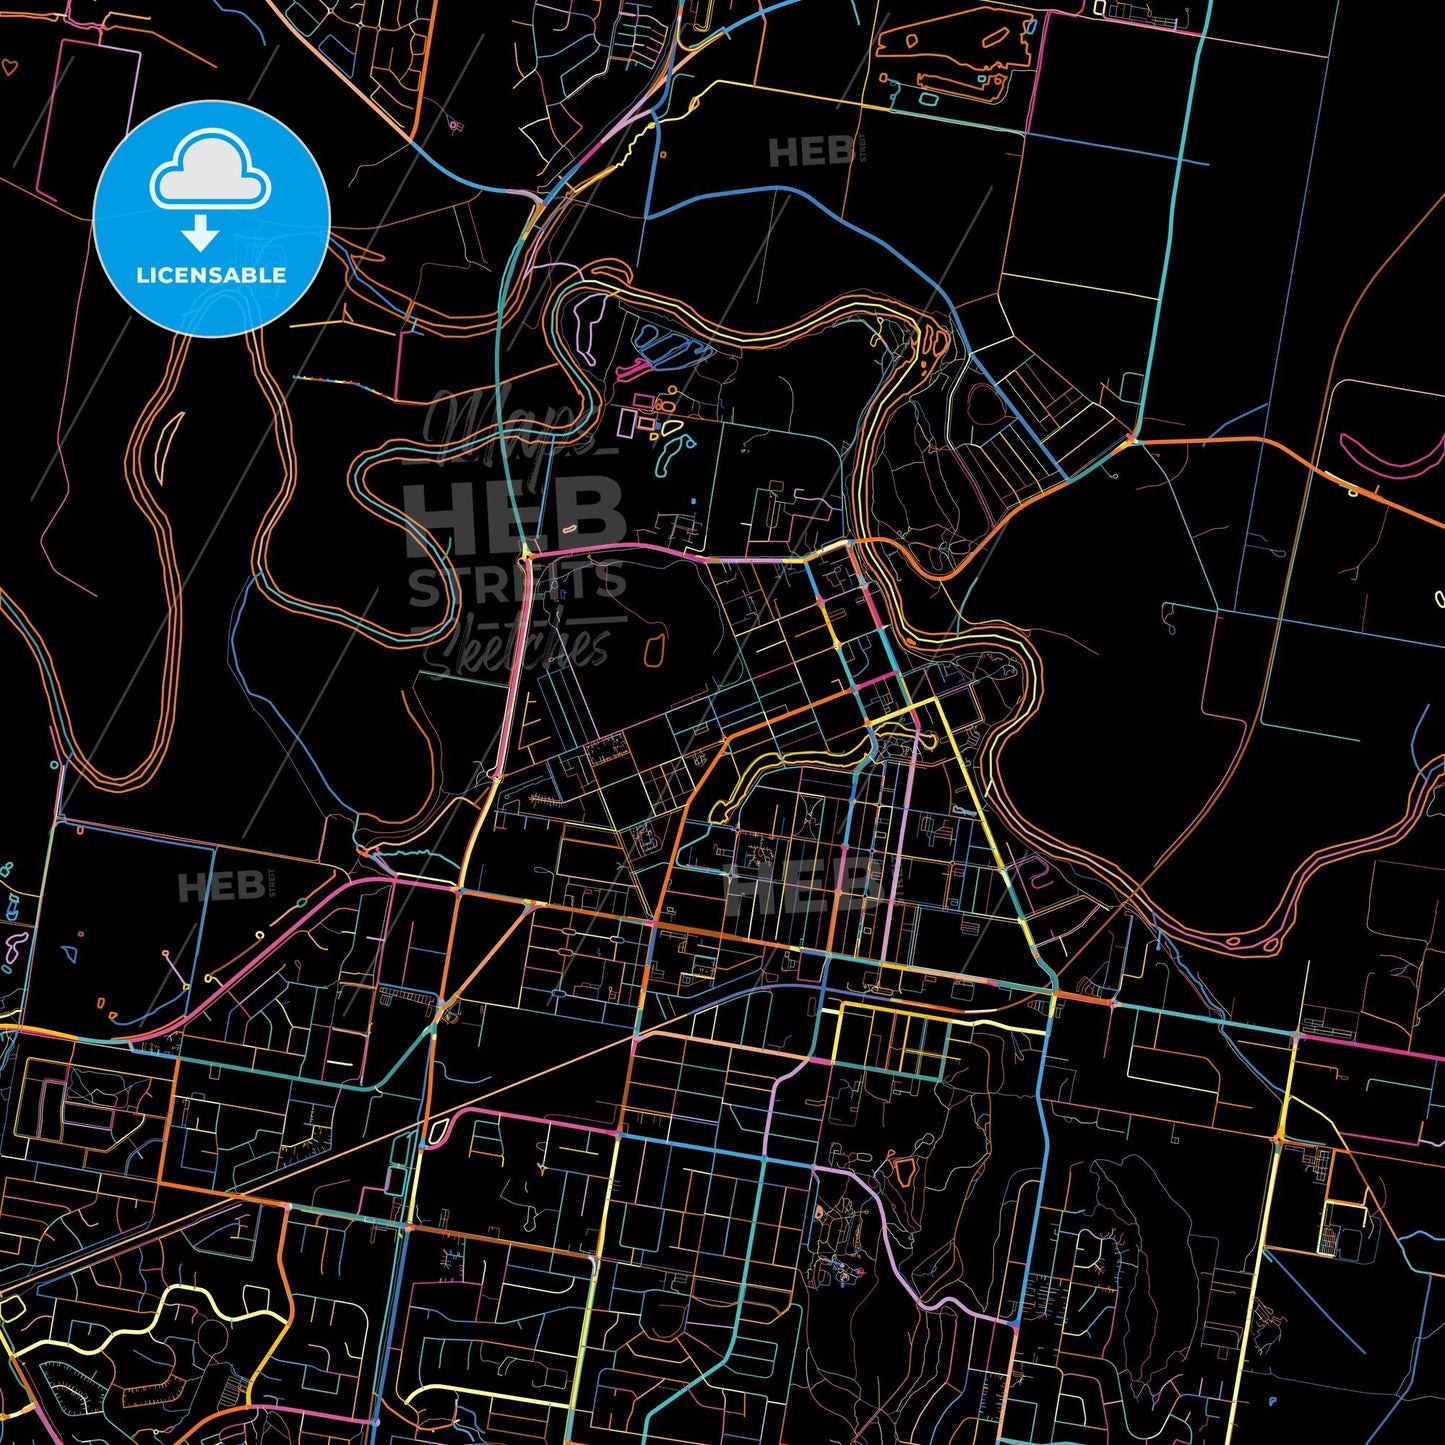 Wagga Wagga, New South Wales, Australia, colorful city map on black background